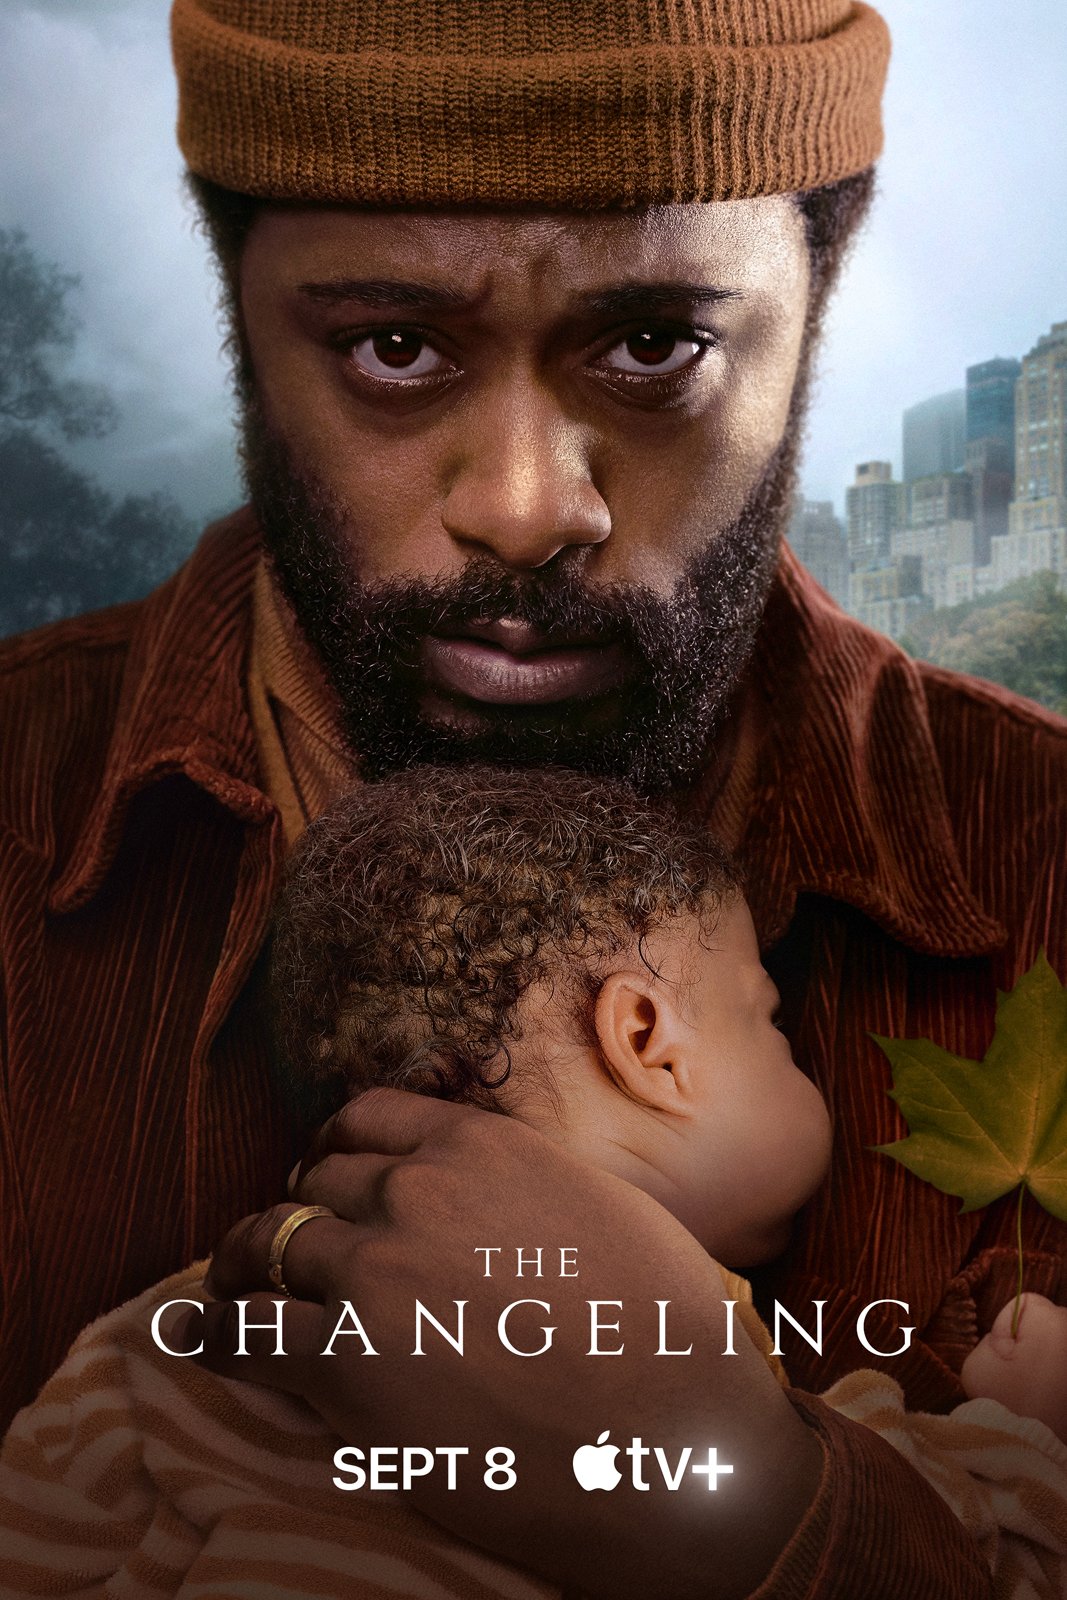 The Changeling - Série TV 2023 streaming VF gratuit complet